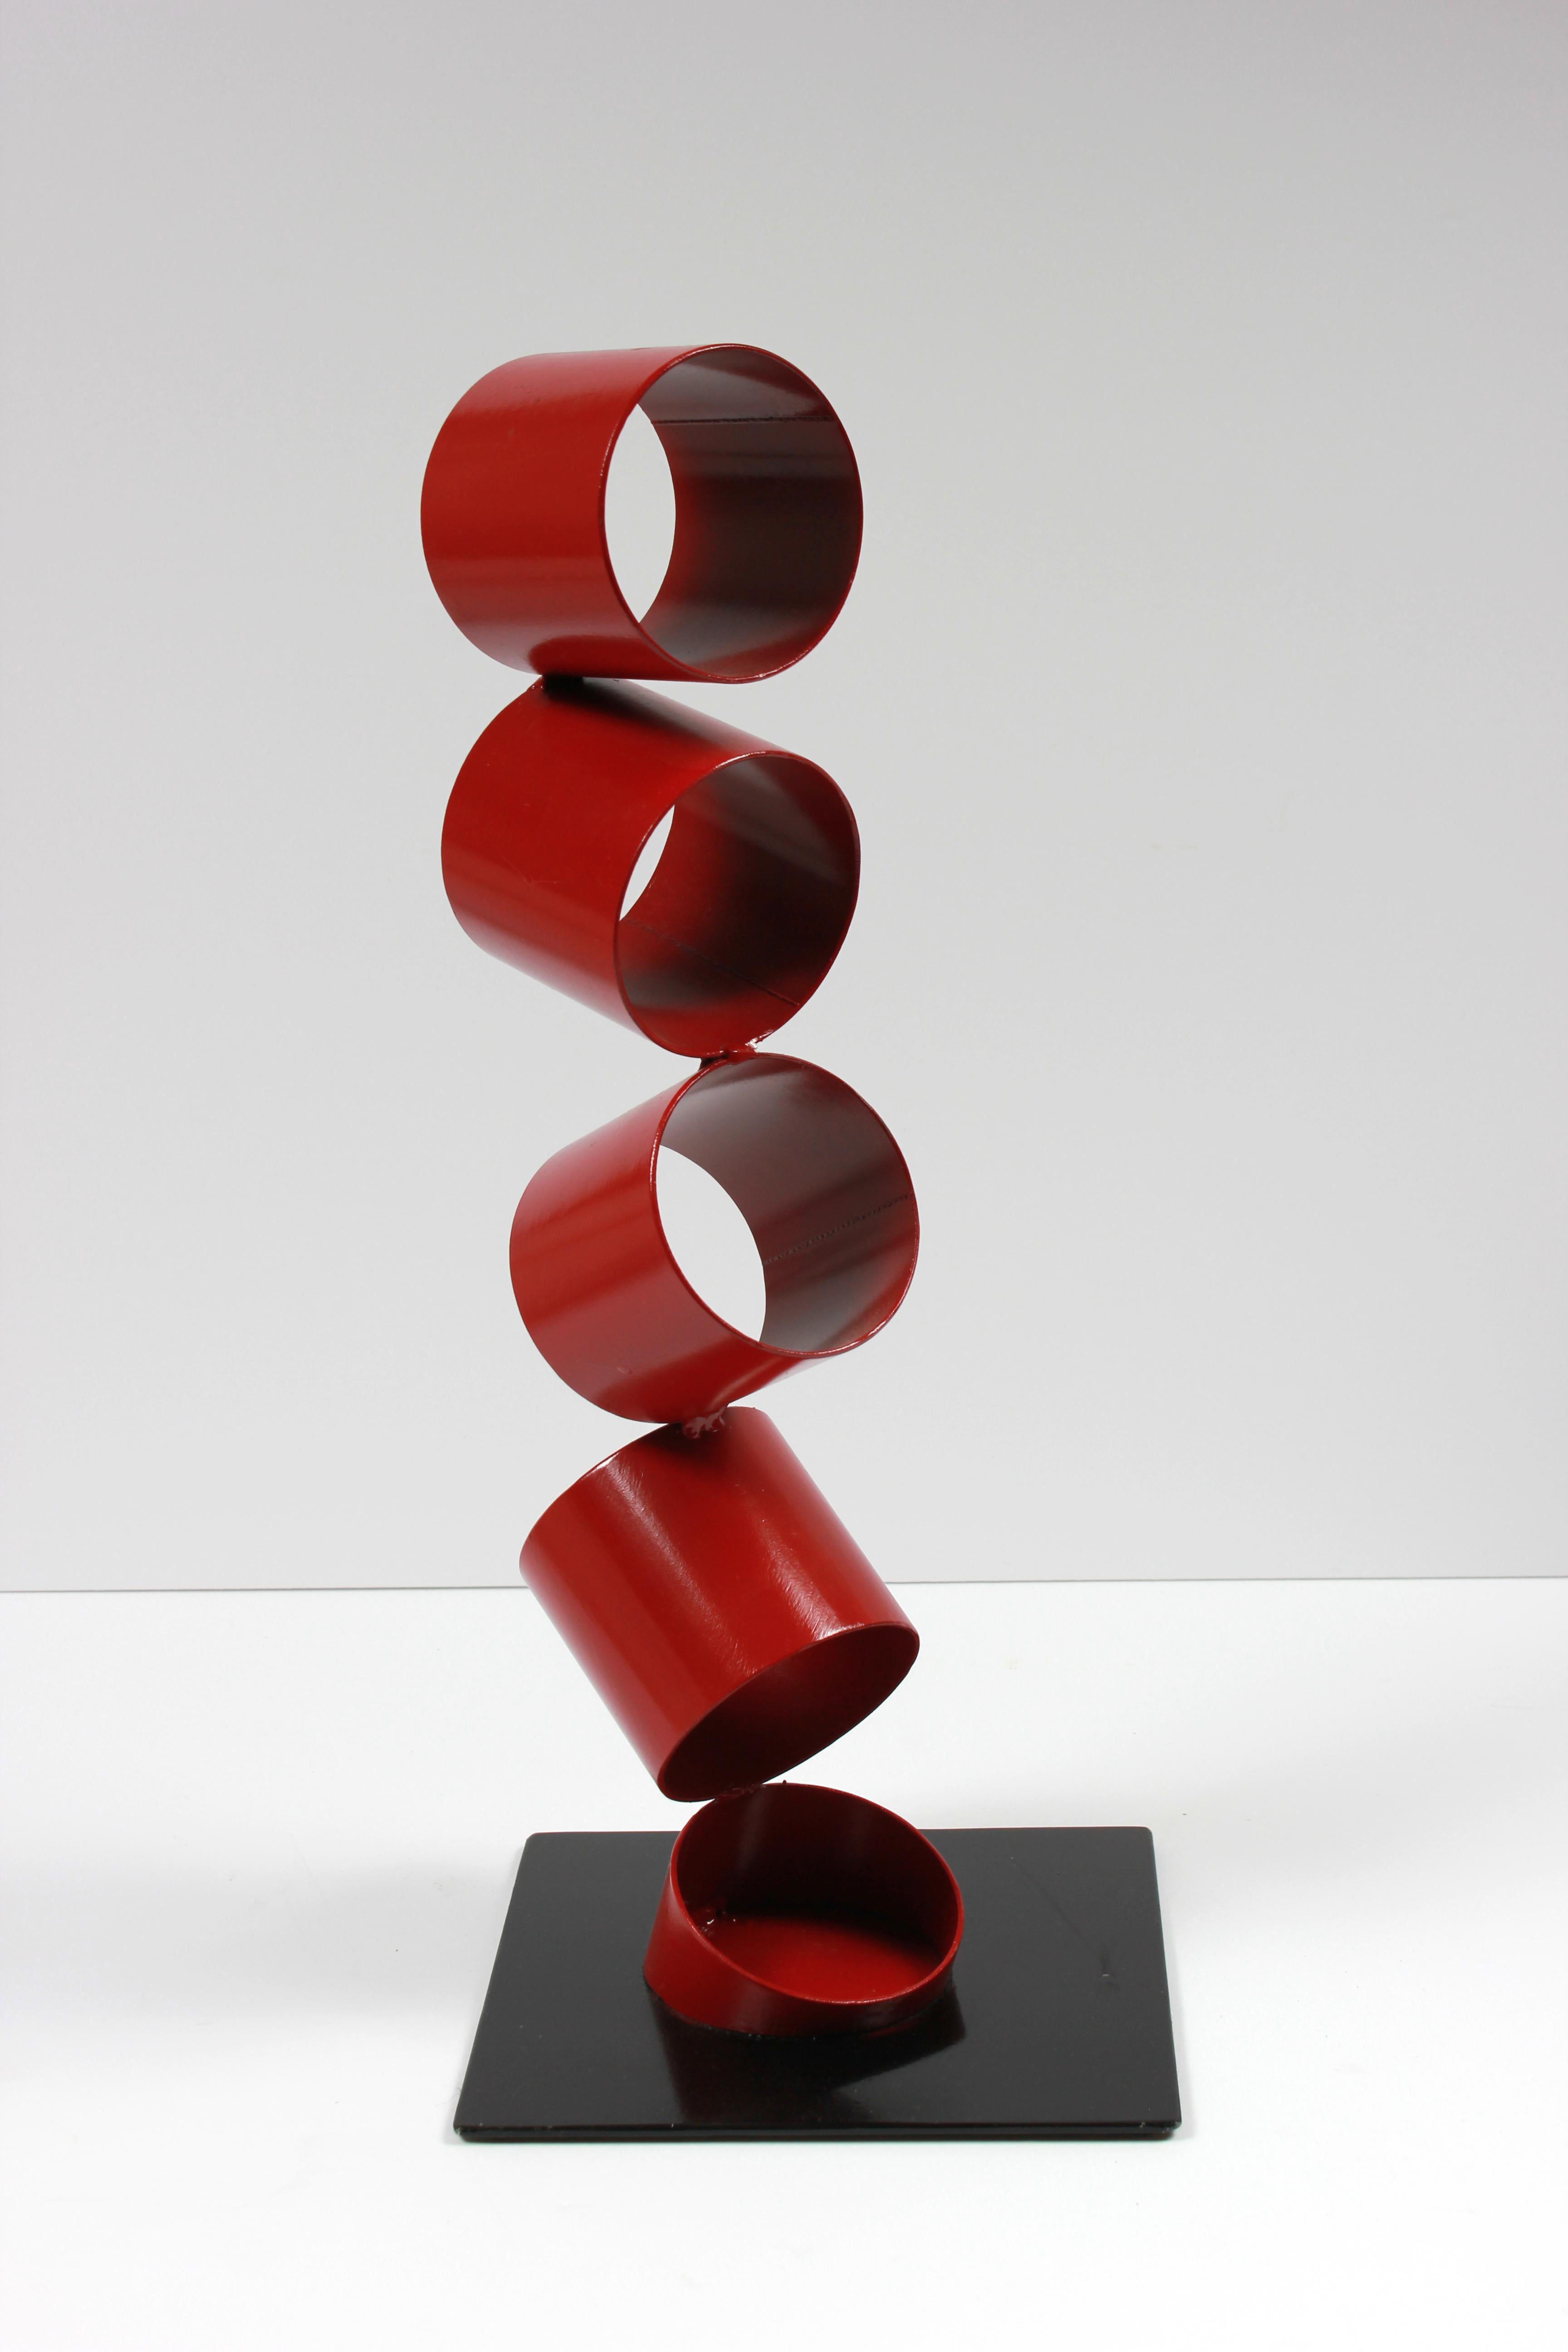 Multimedia Metal Sculpture of Six Red Rings in an Angled Stack - Gray Abstract Sculpture by Unknown